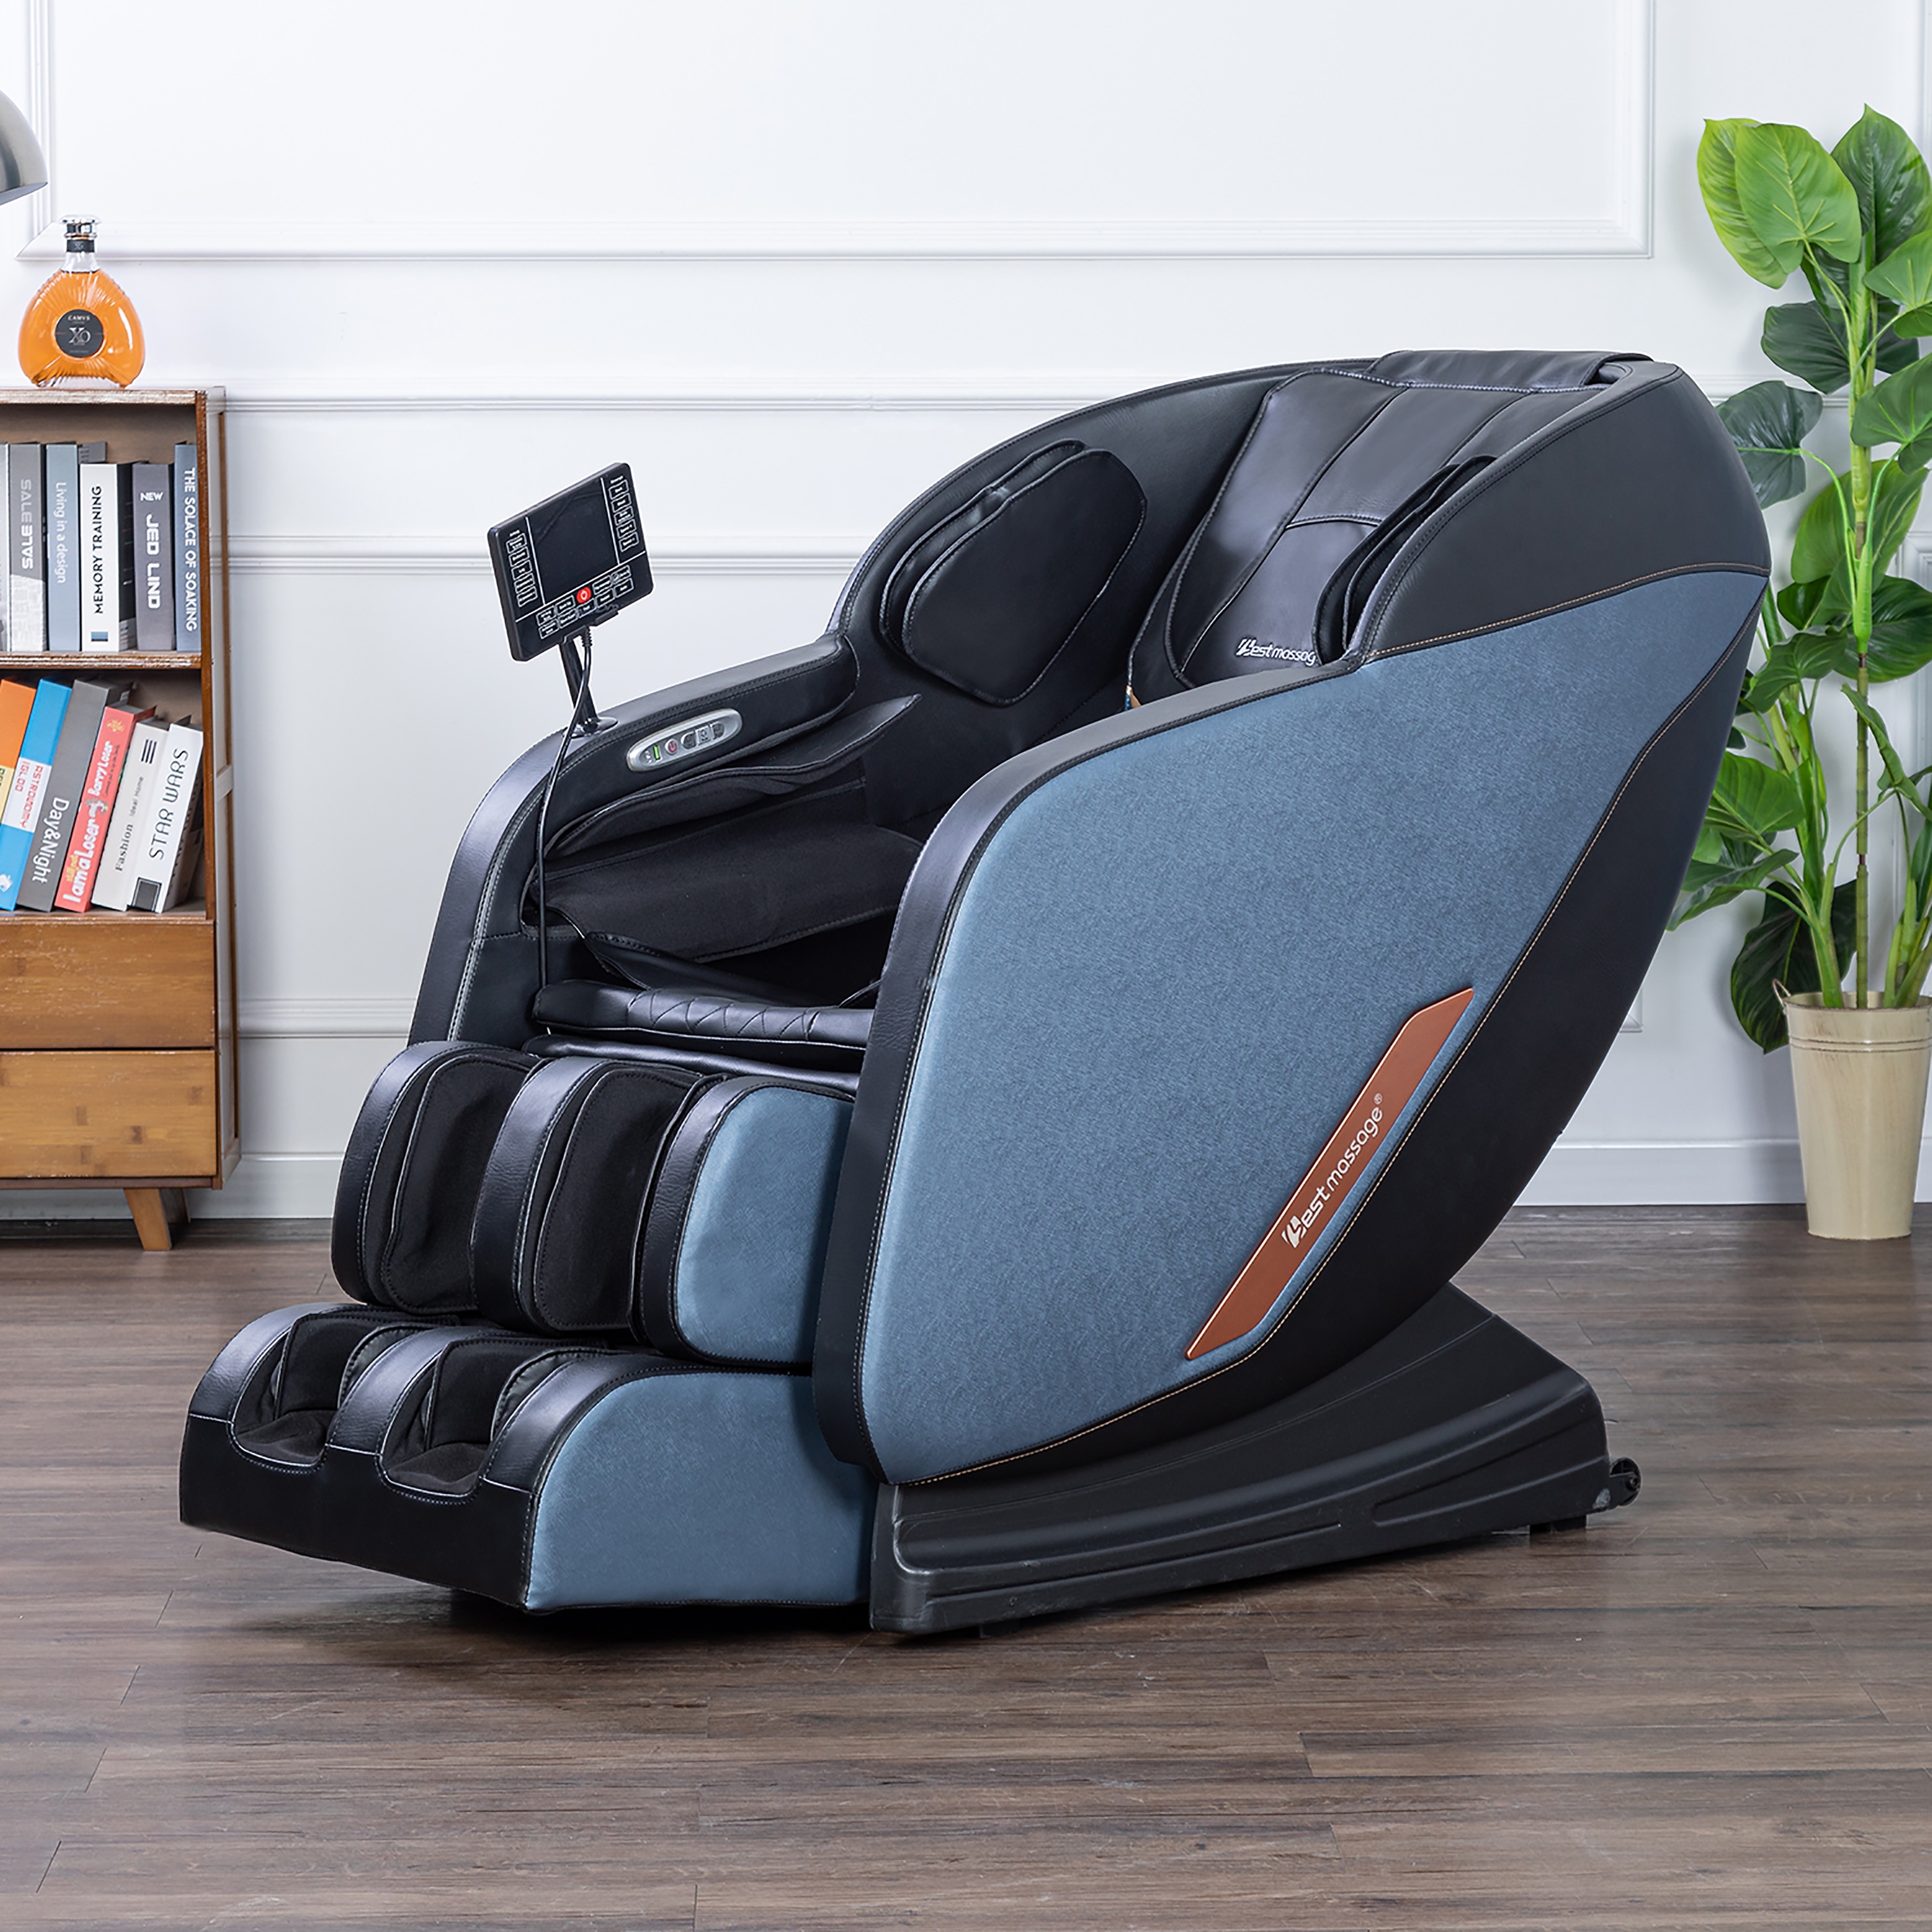 https://ak1.ostkcdn.com/images/products/is/images/direct/cd0977895e7f77b8902fcfbed3ed68febcc2088a/Lanny-Faux-Leather-Zero-Gravity-Massage-Chair-with-Full-Body-Air-Bag.jpg